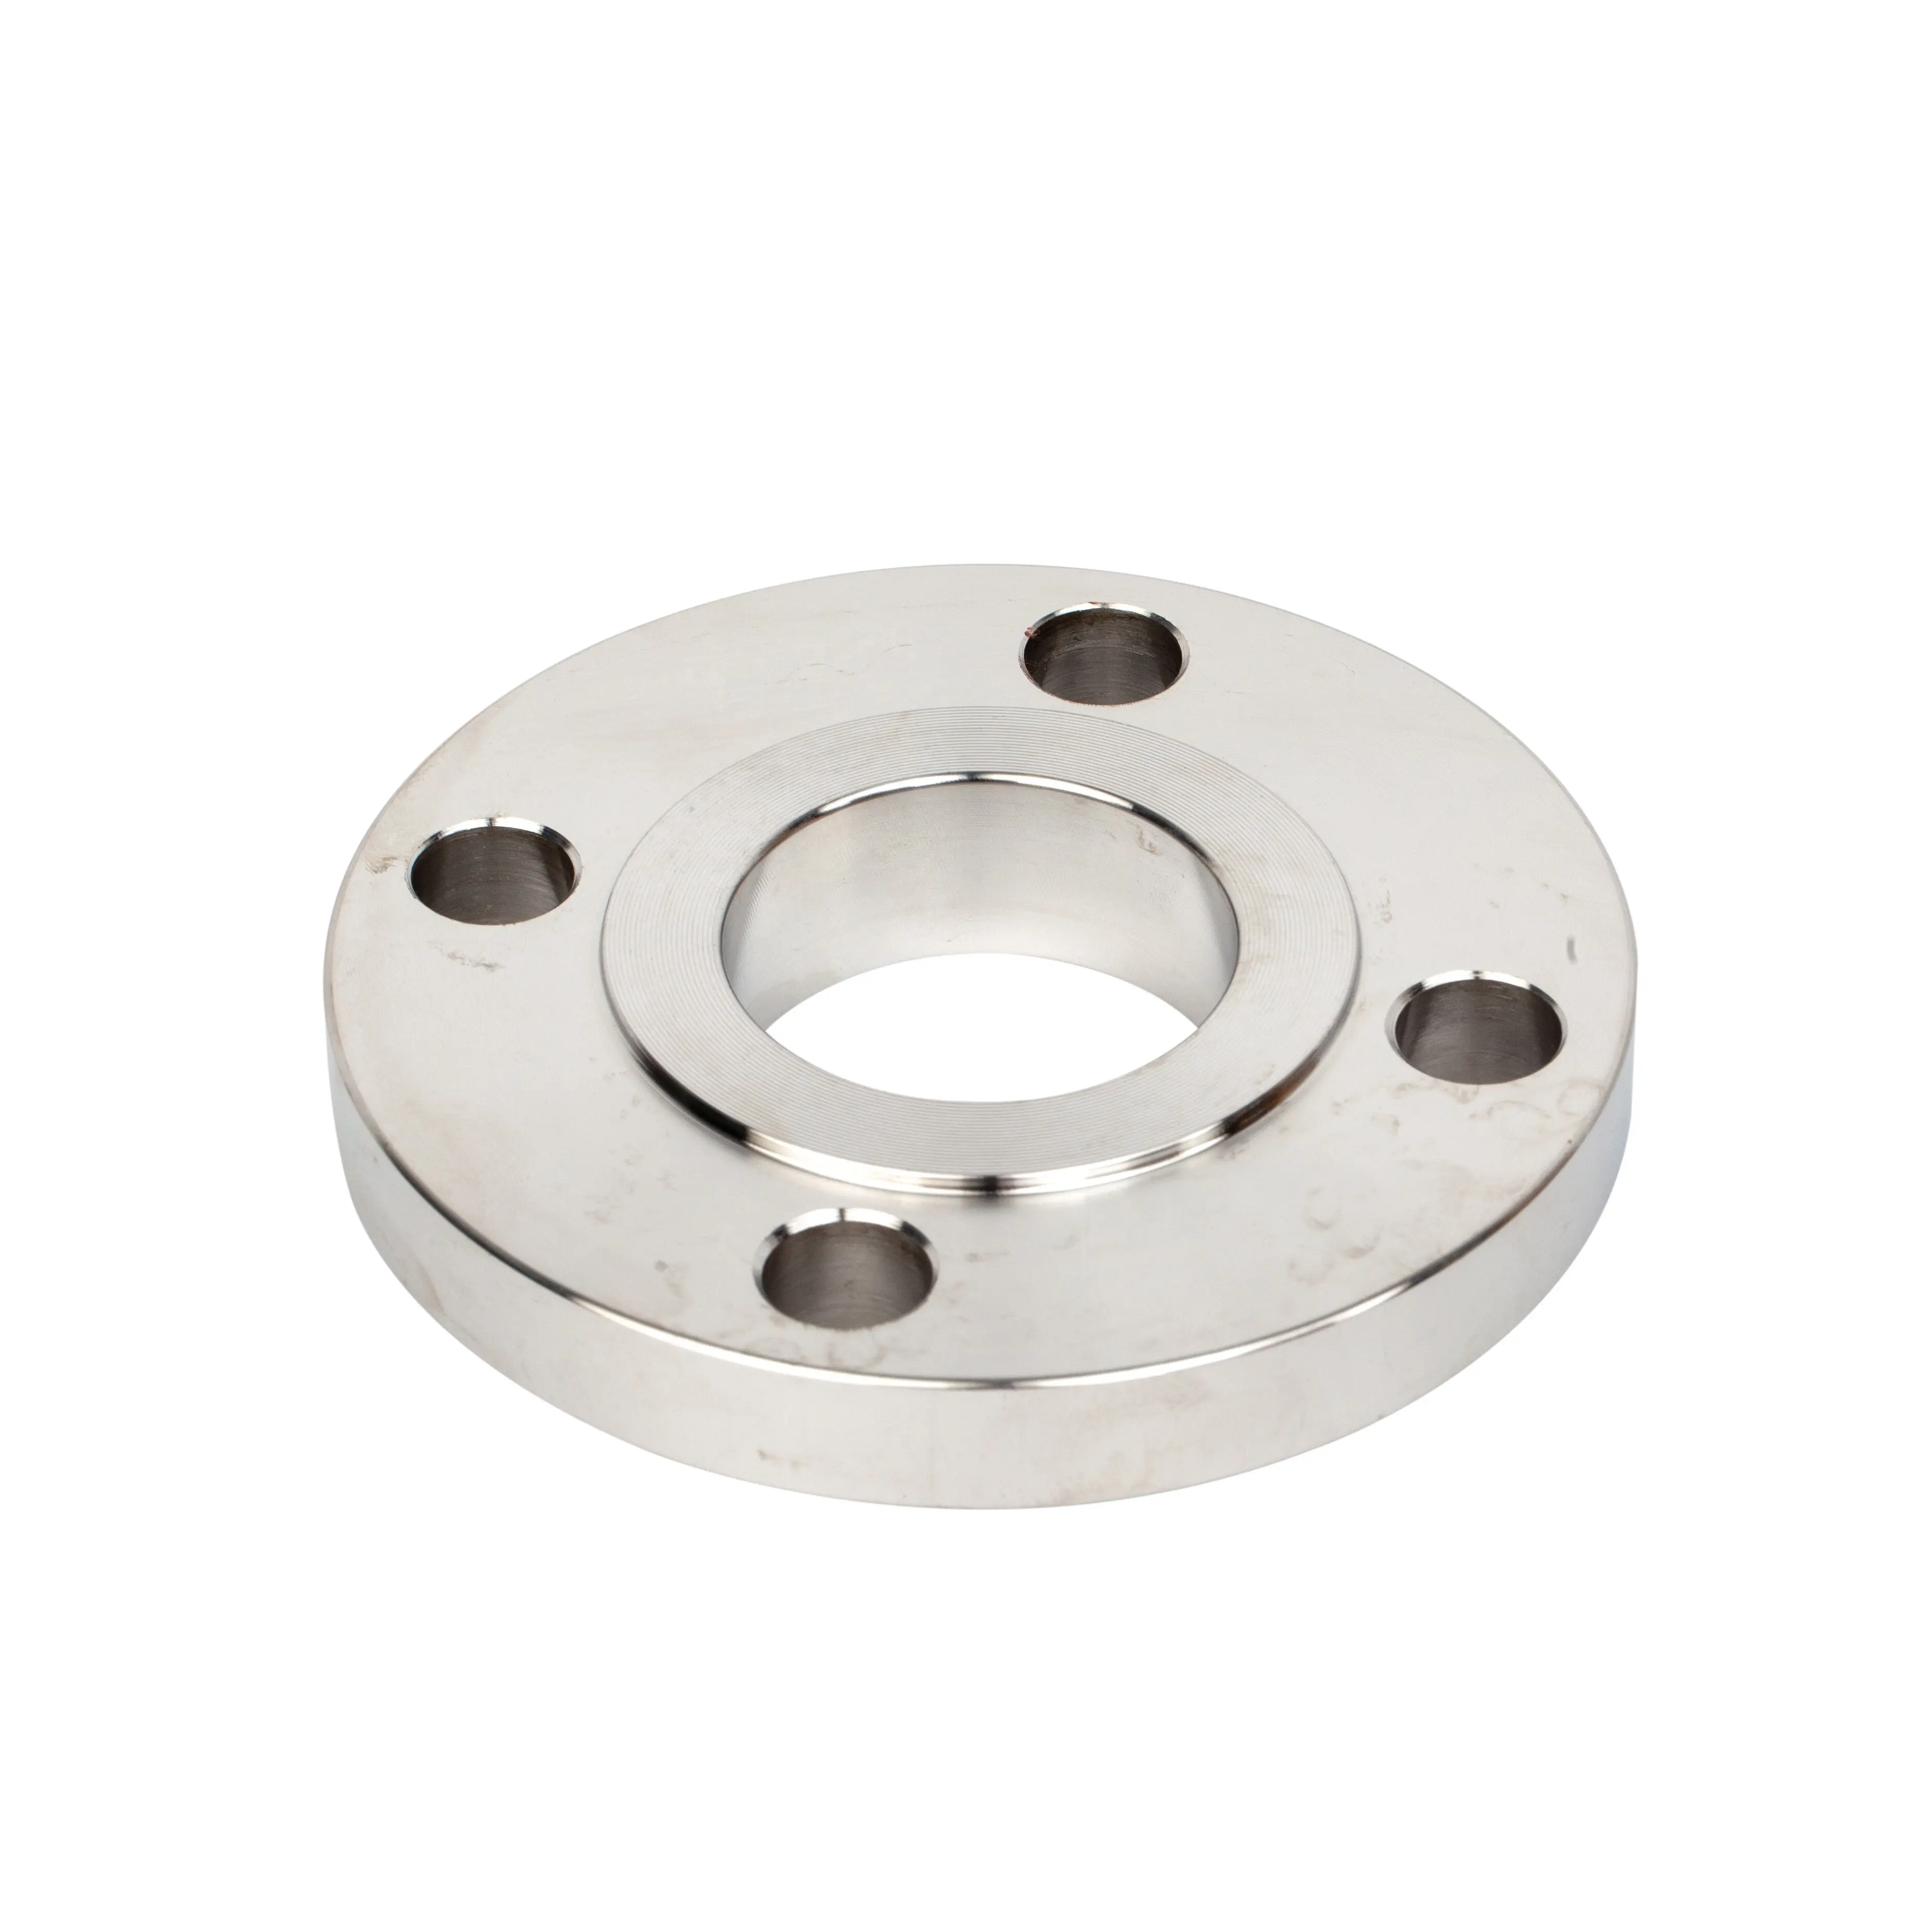 pn10 dn80 Stainless Steel aisi 316 #150 ANSI SORF pipe Flange